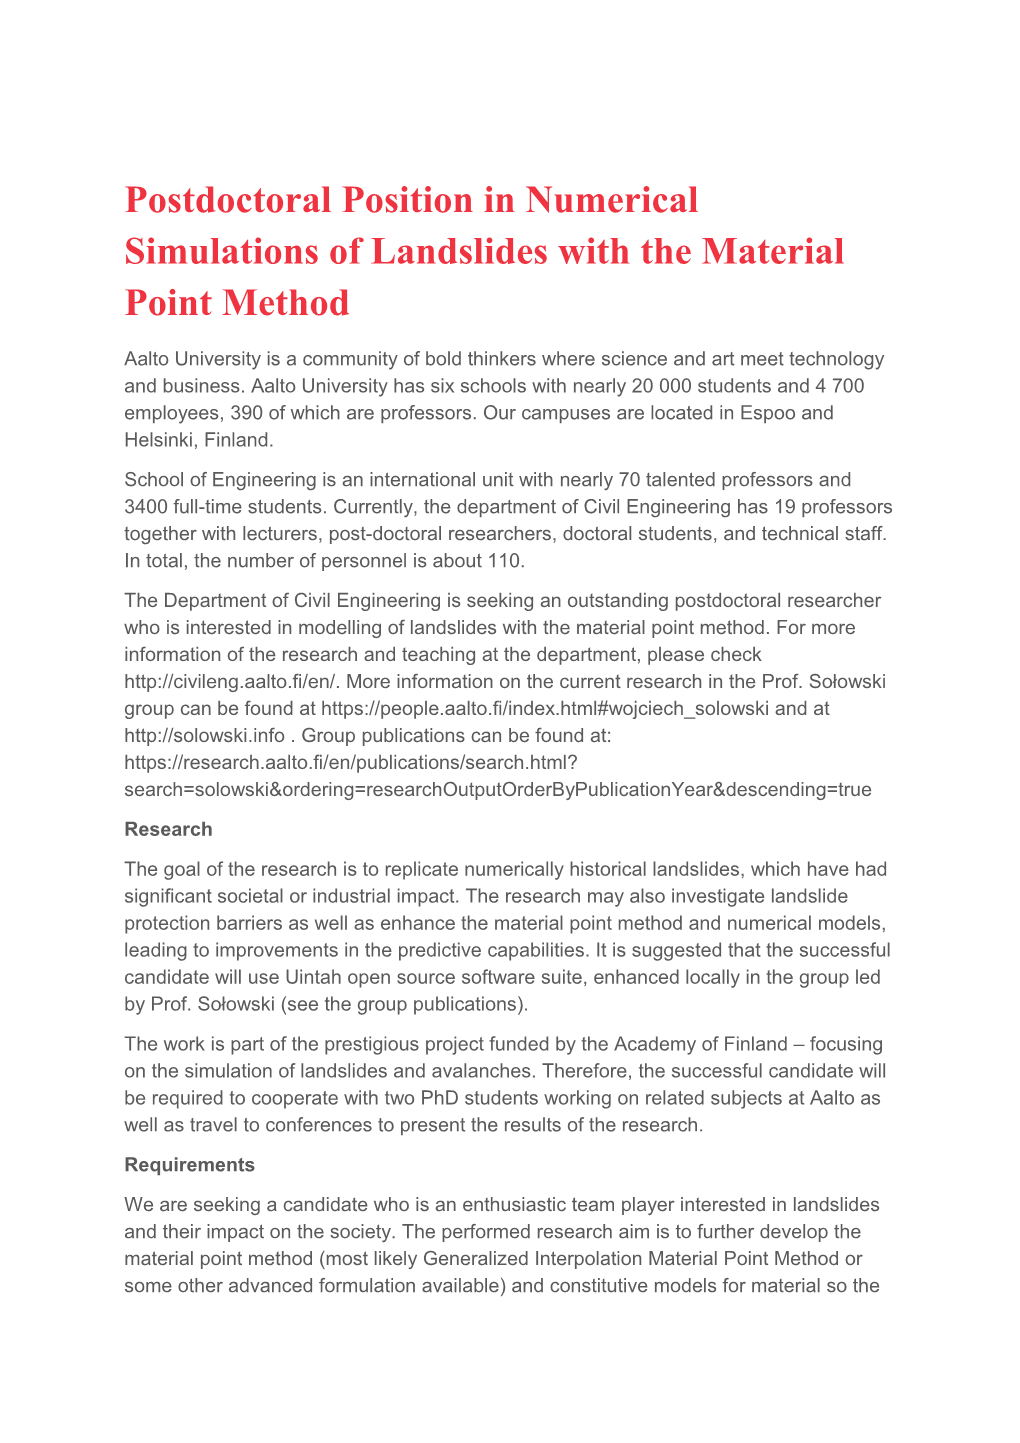 Postdoctoral Position in Numerical Simulations of Landslides with the Material Point Method